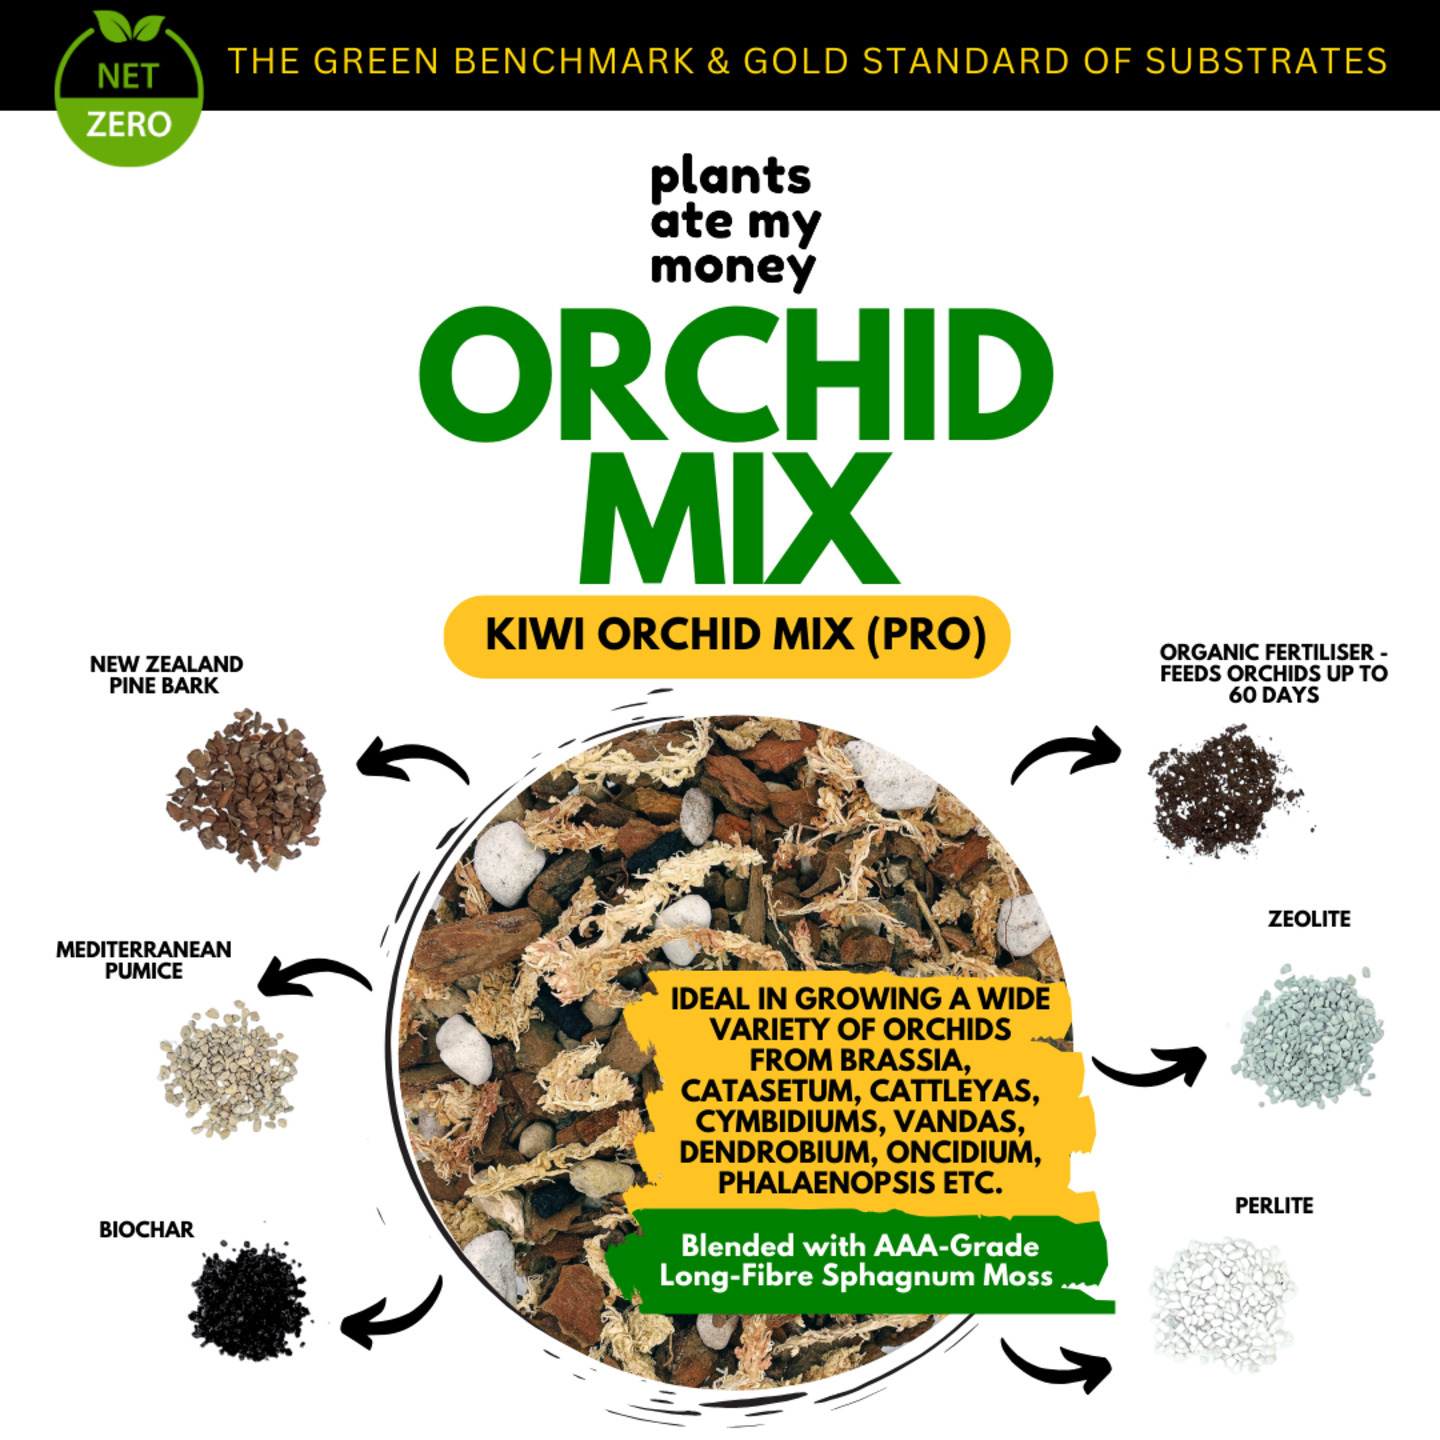 Kiwi Orchid Mix - Pro 6L - Premium Potting Mix made for Orchids, Cattleyas and Phalaenopsis